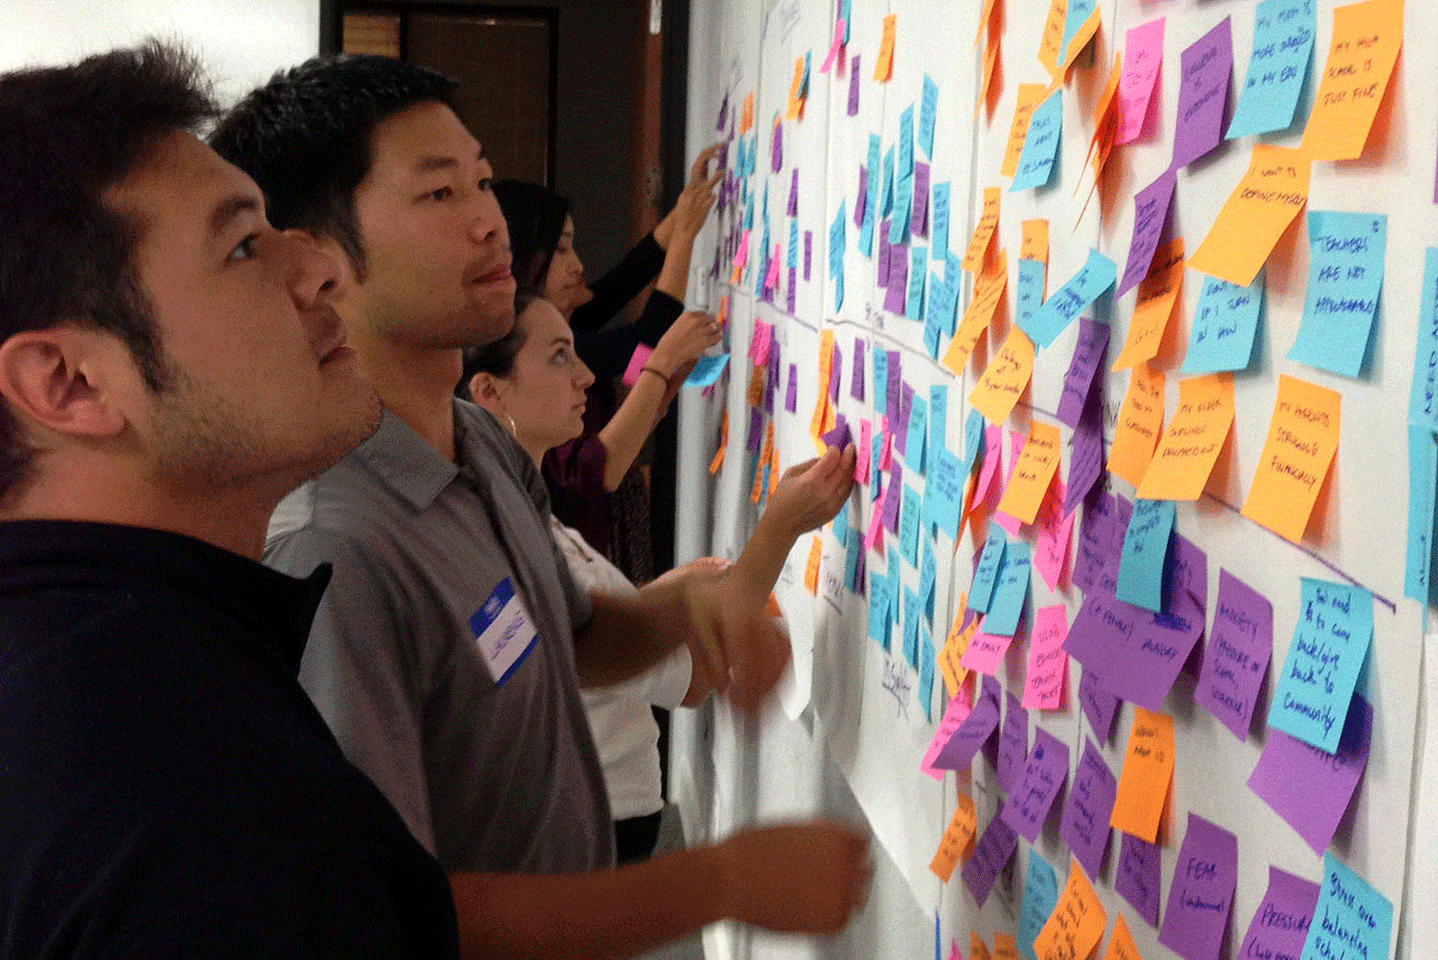 High School design team members check out ideas written on post-it notes during a brainstorming session. (Photo: Courtesy of Will Eden) 